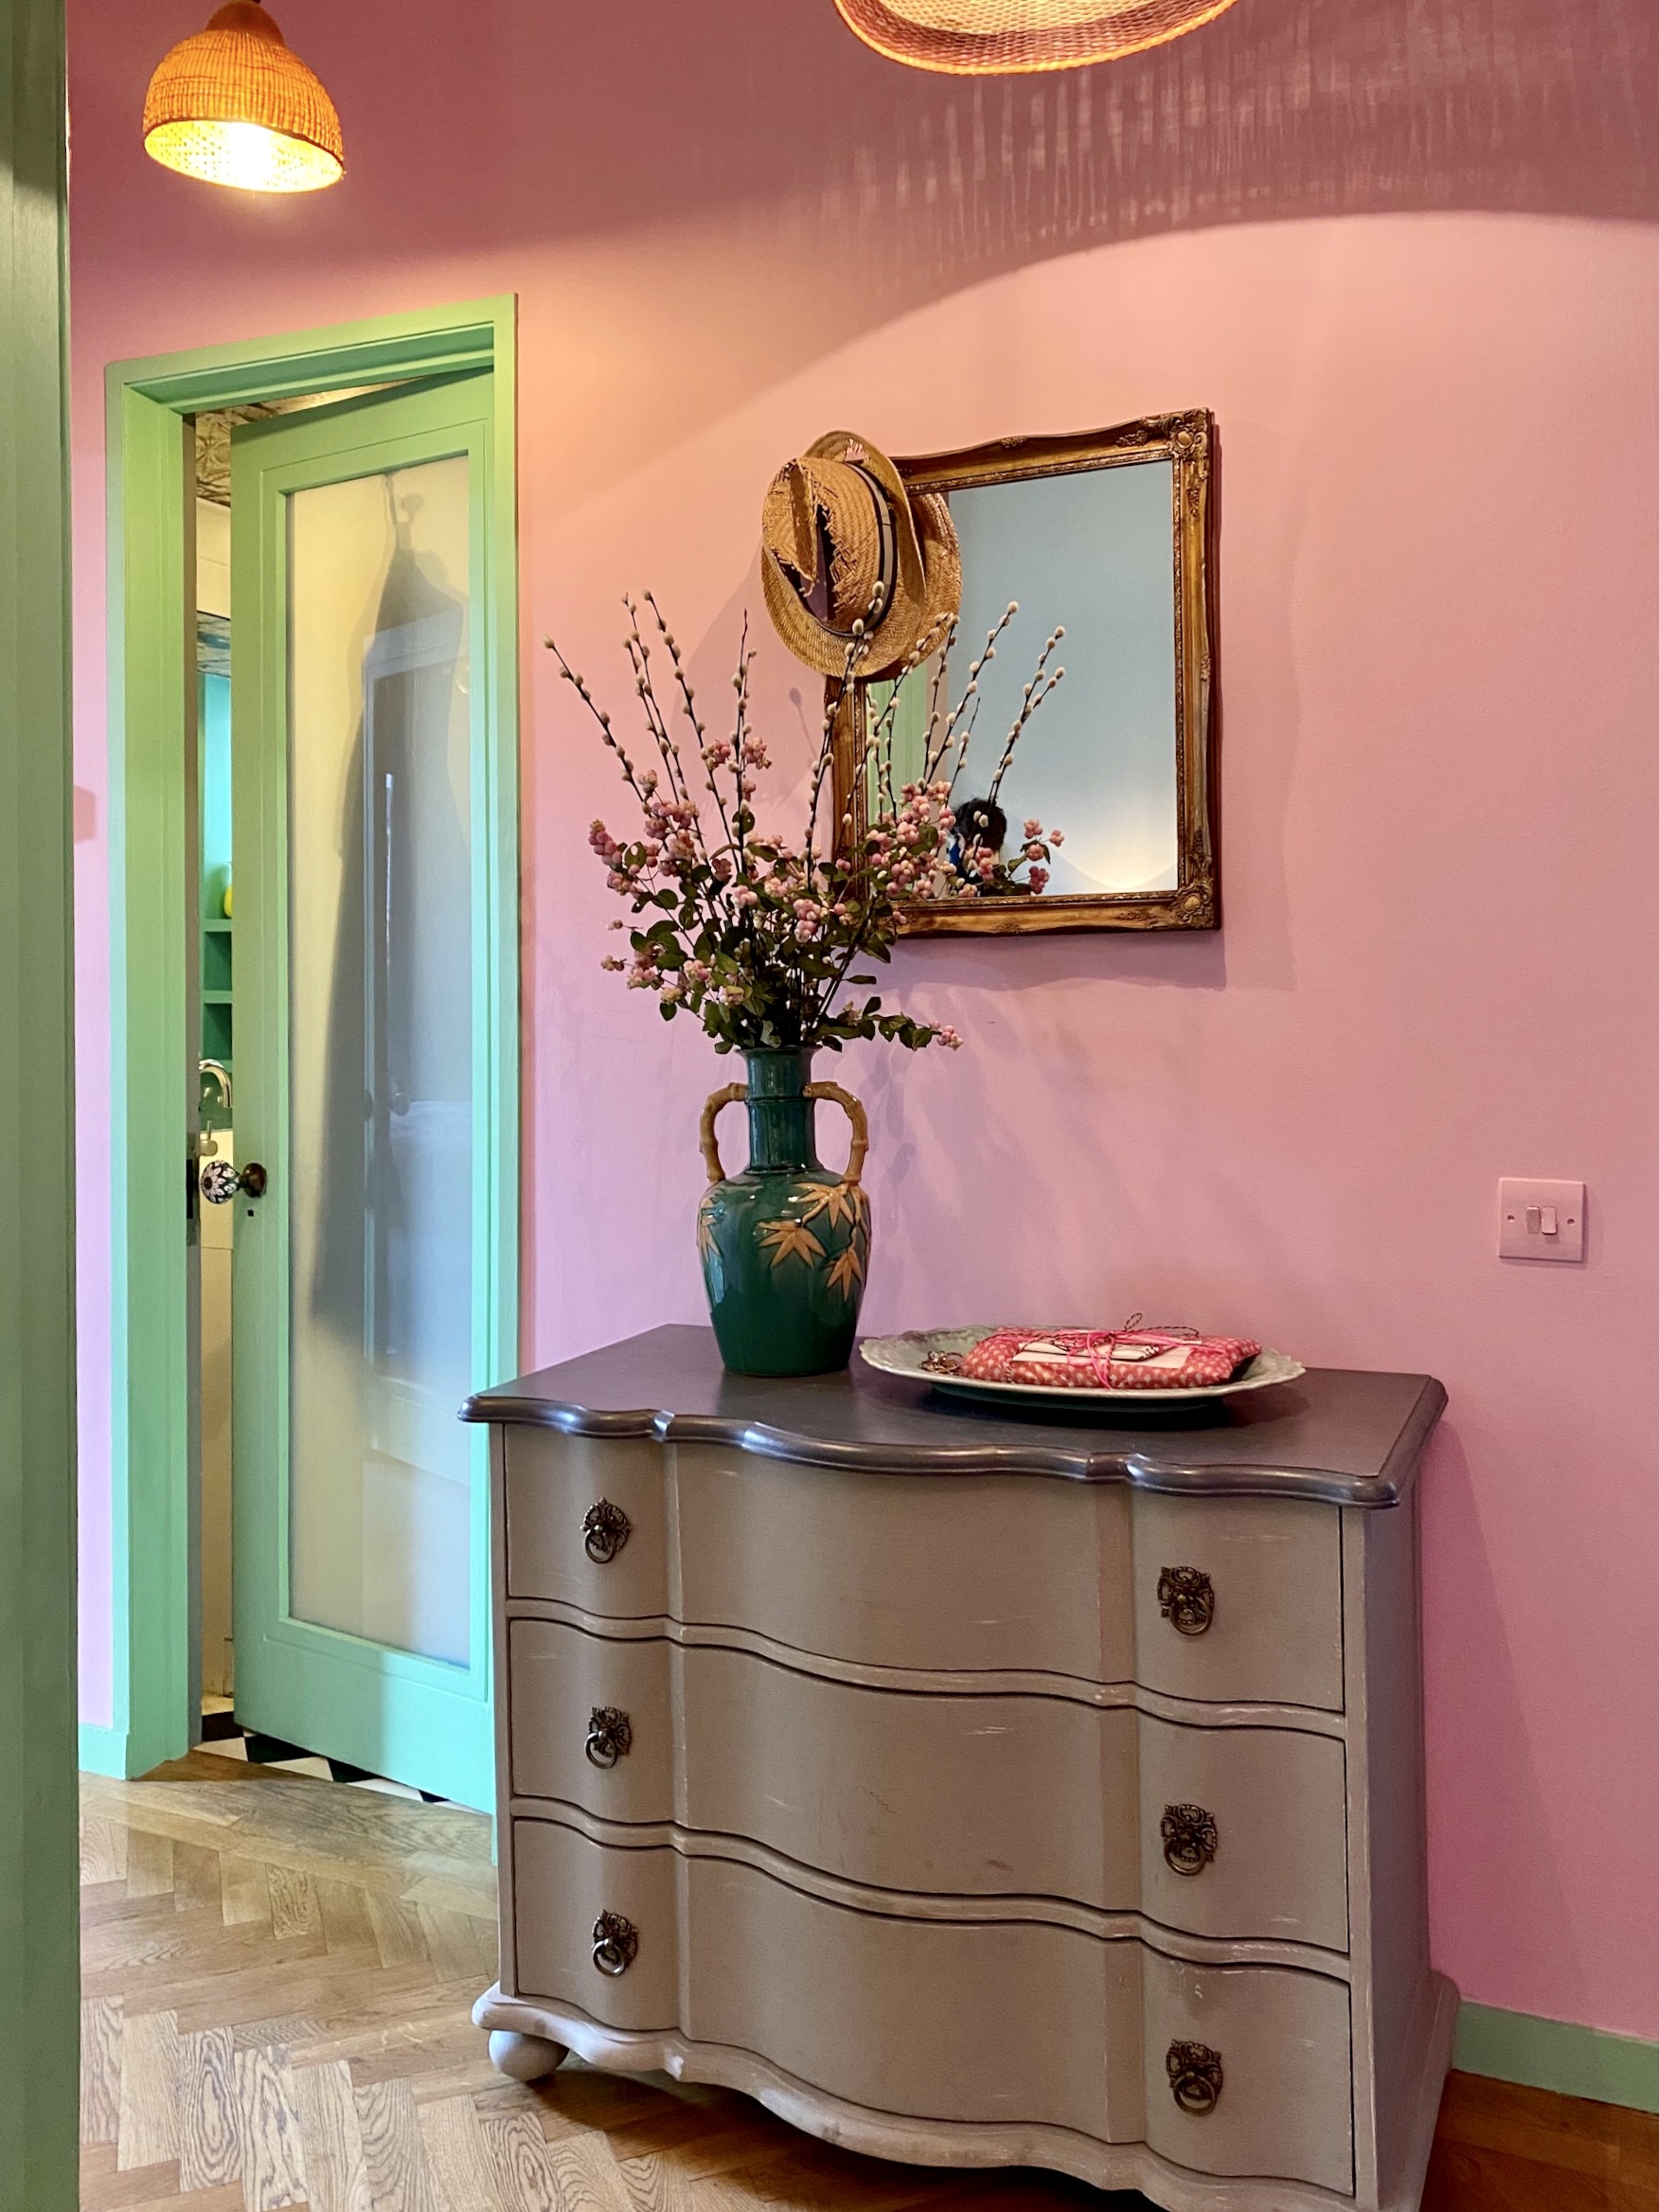 Candy pink walls and mint green woodwork in the London home of Matthew Williamson